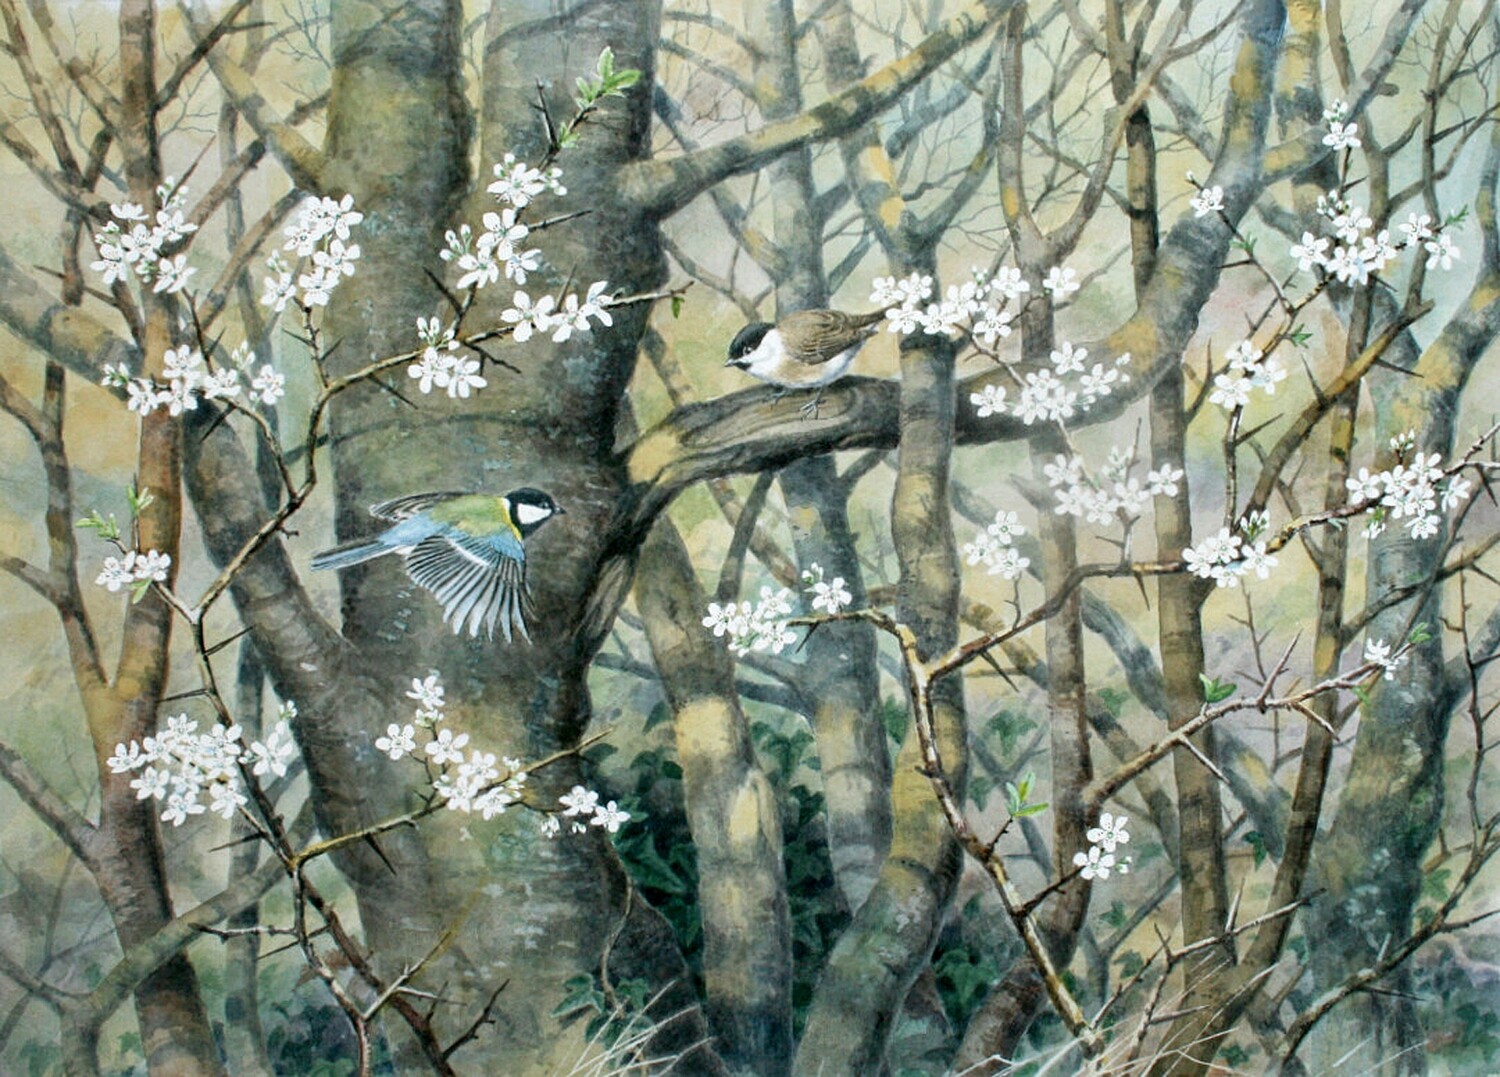 Great Tit and Willow Tit in Blackthorn Trees